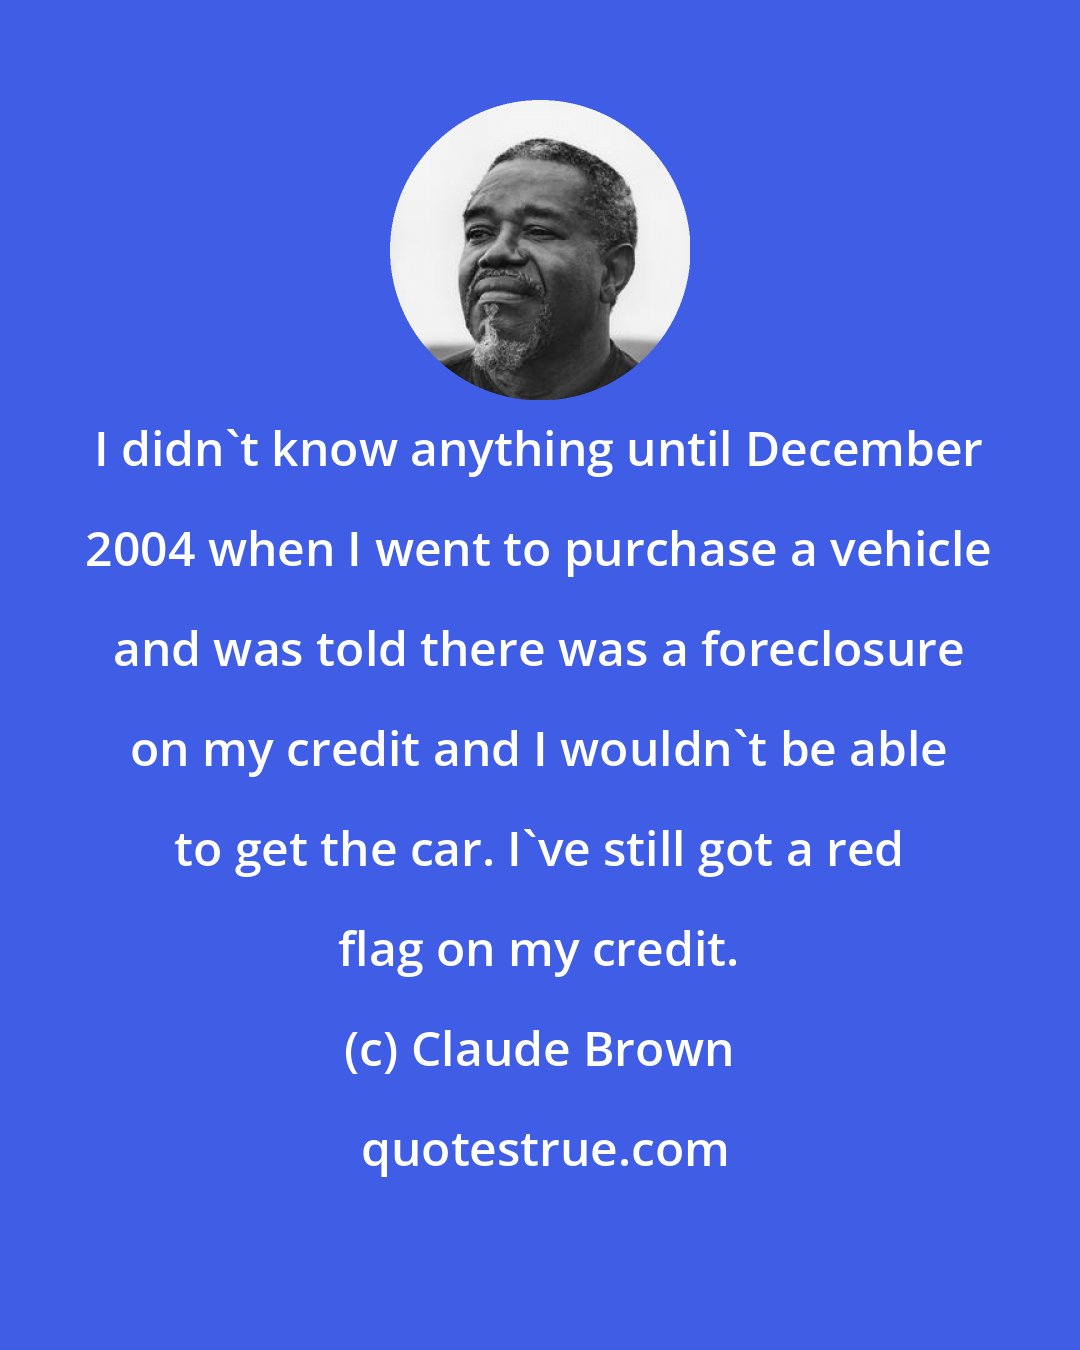 Claude Brown: I didn't know anything until December 2004 when I went to purchase a vehicle and was told there was a foreclosure on my credit and I wouldn't be able to get the car. I've still got a red flag on my credit.